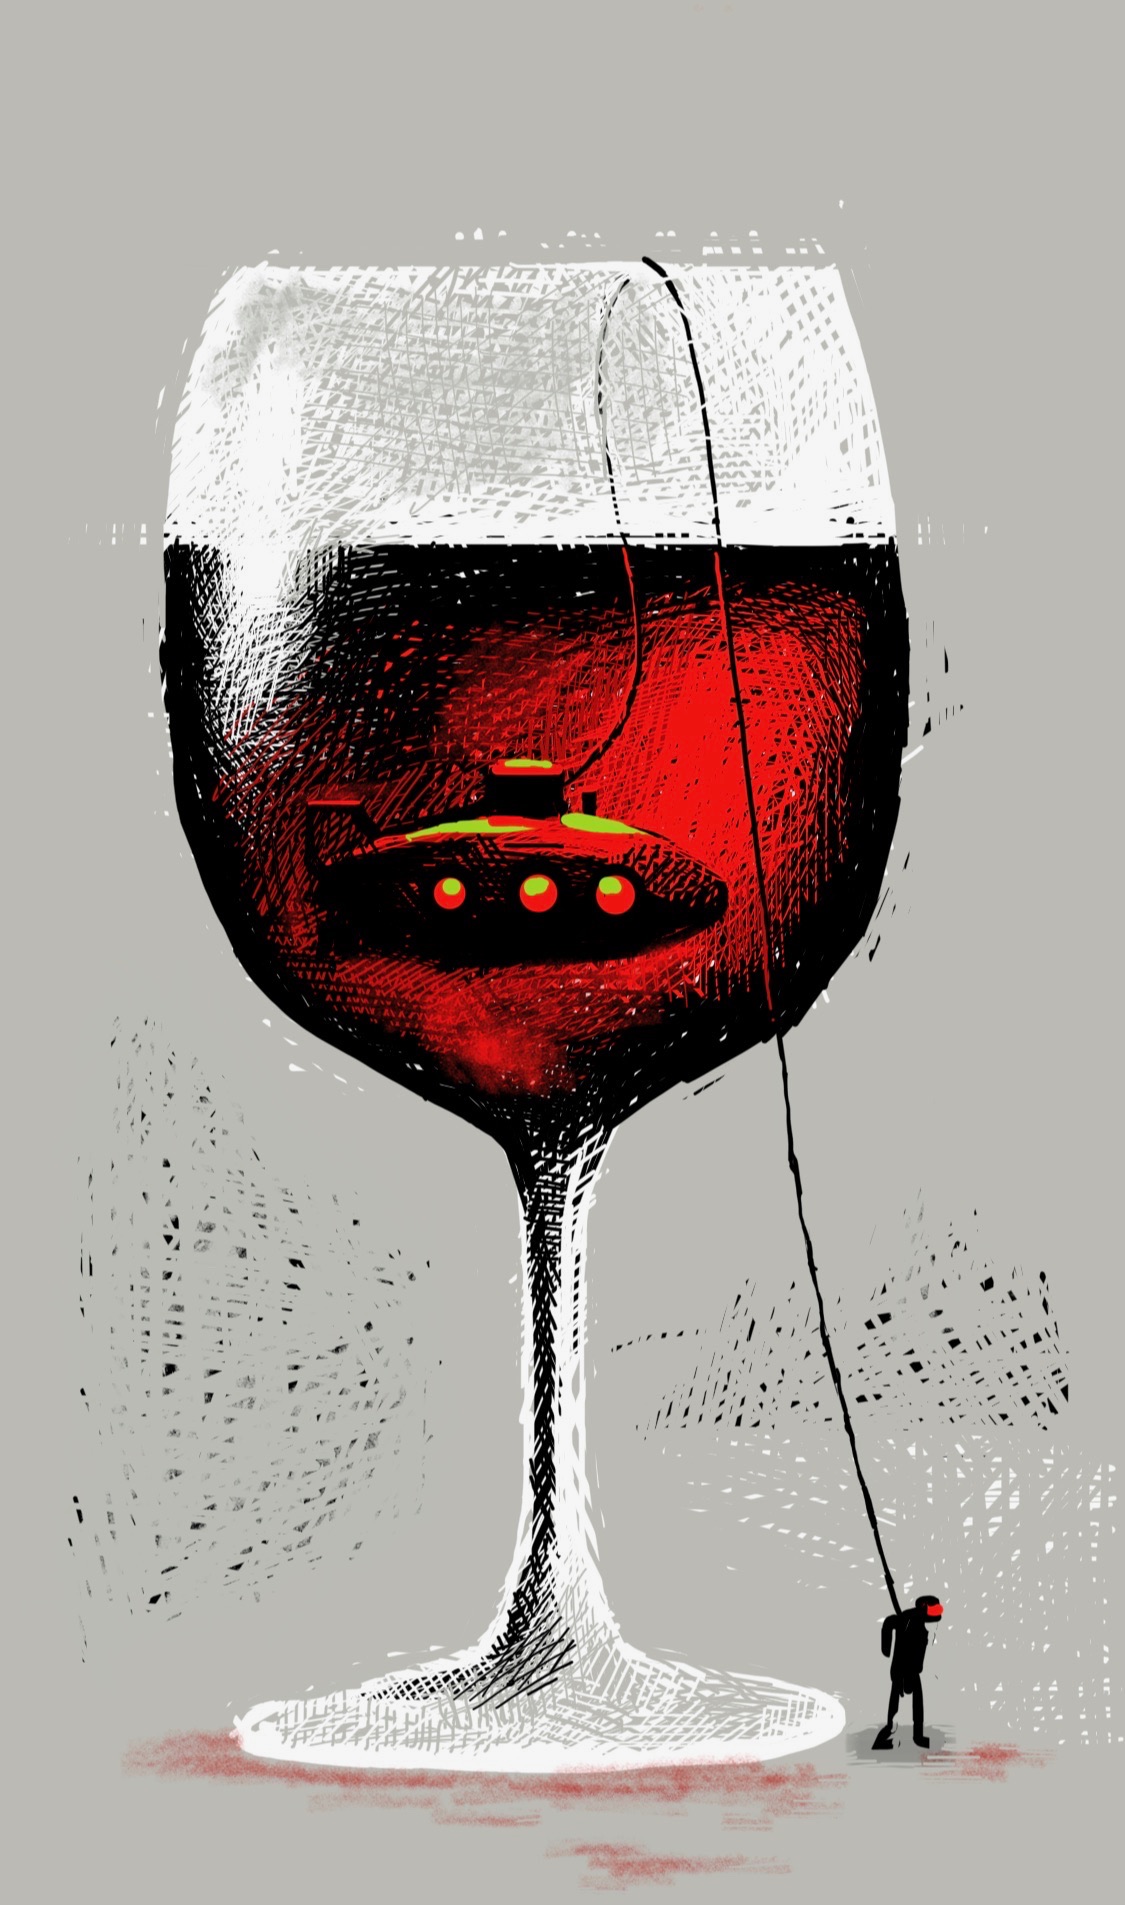 A submarine in a wine glass. An explorer is tethered to the submarine and walking on the ground outside the glass.